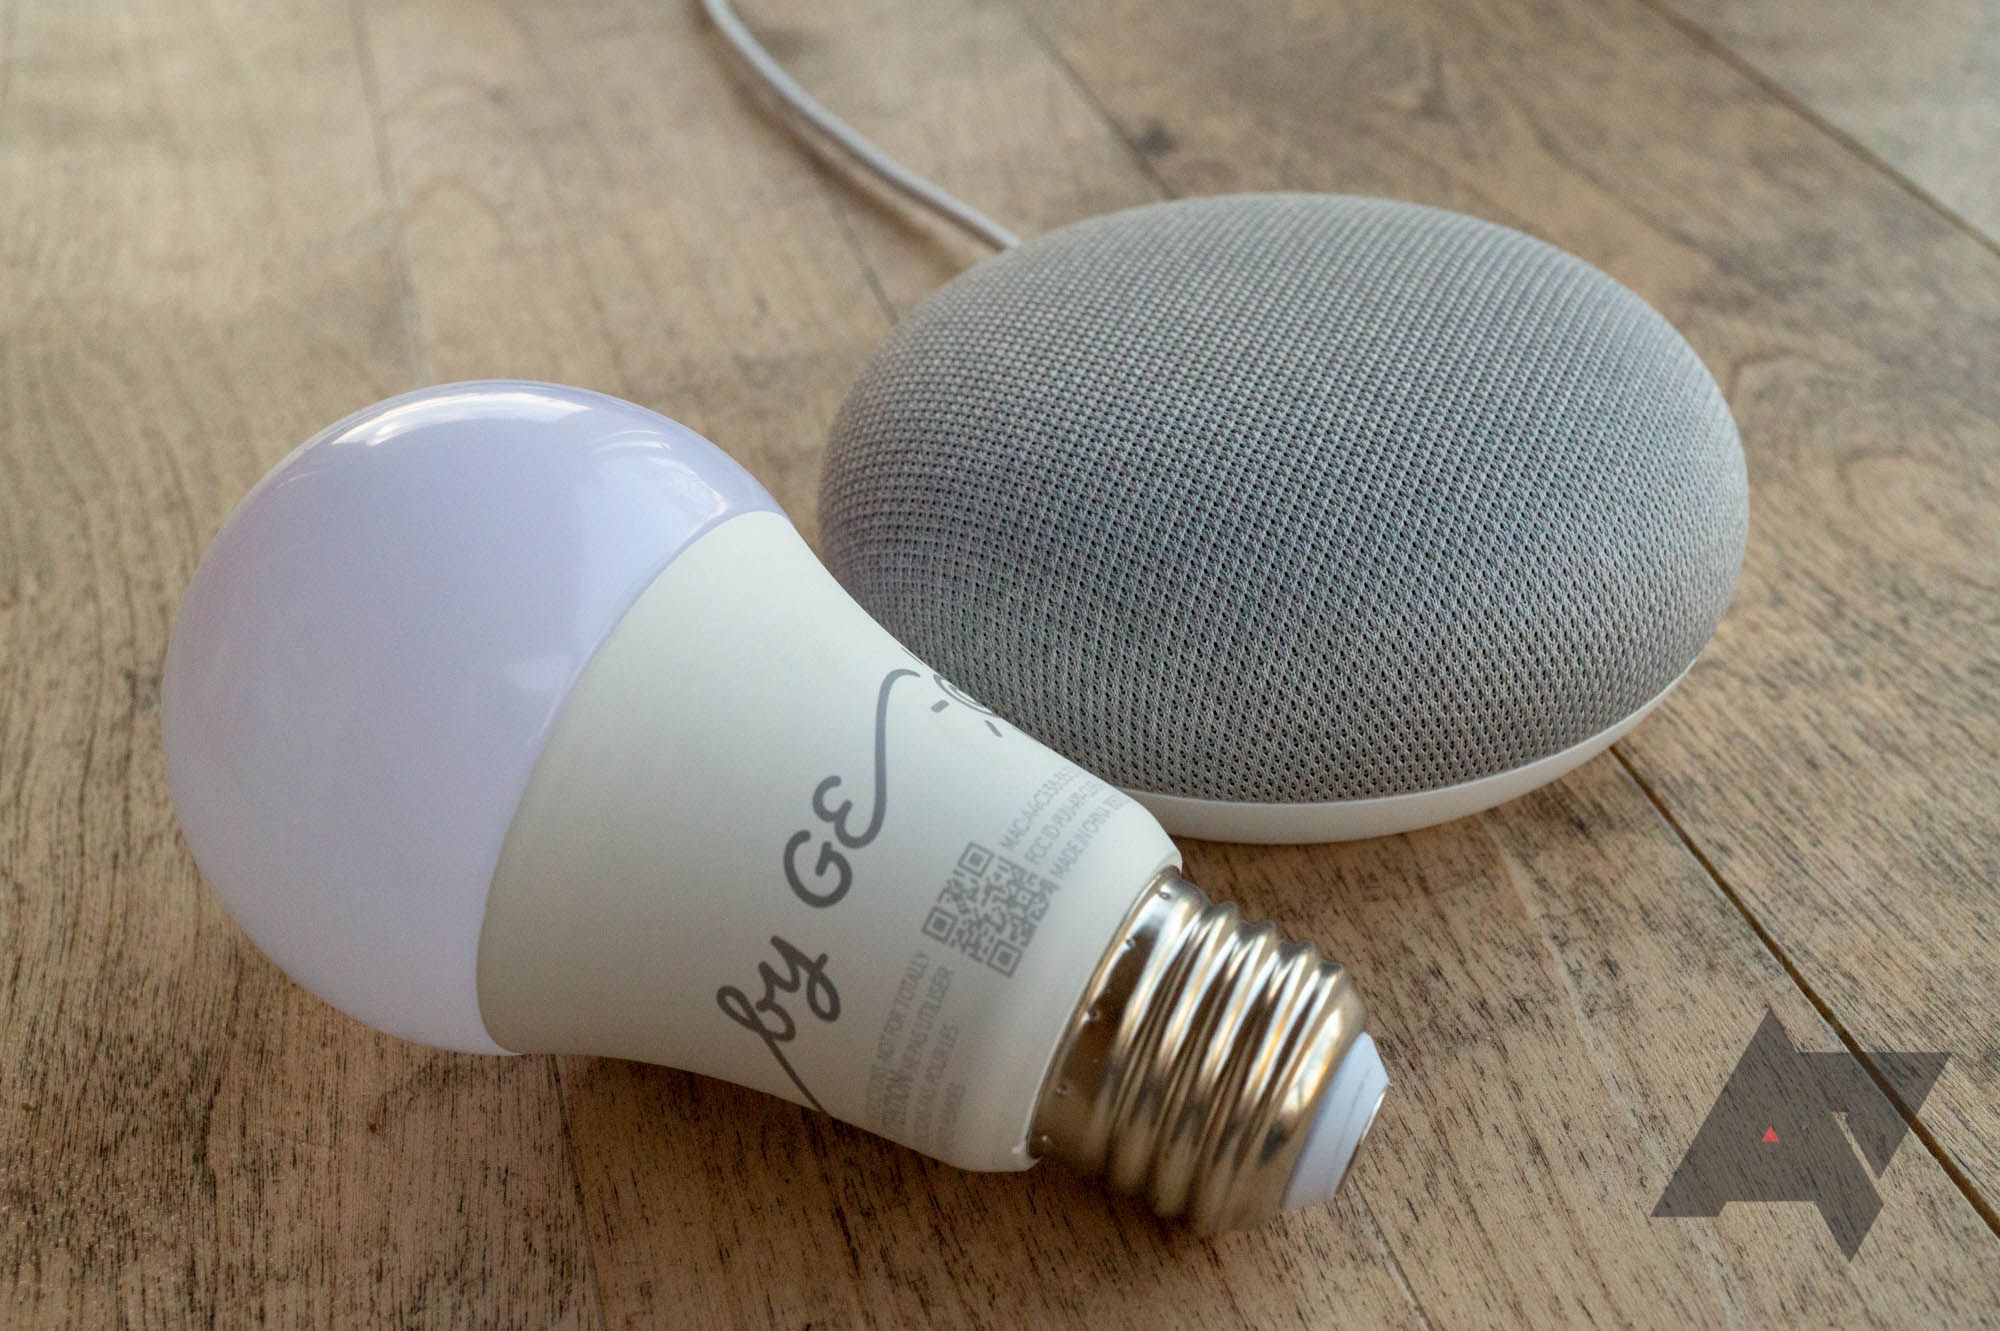 The best smart light bulbs that work with Google Home